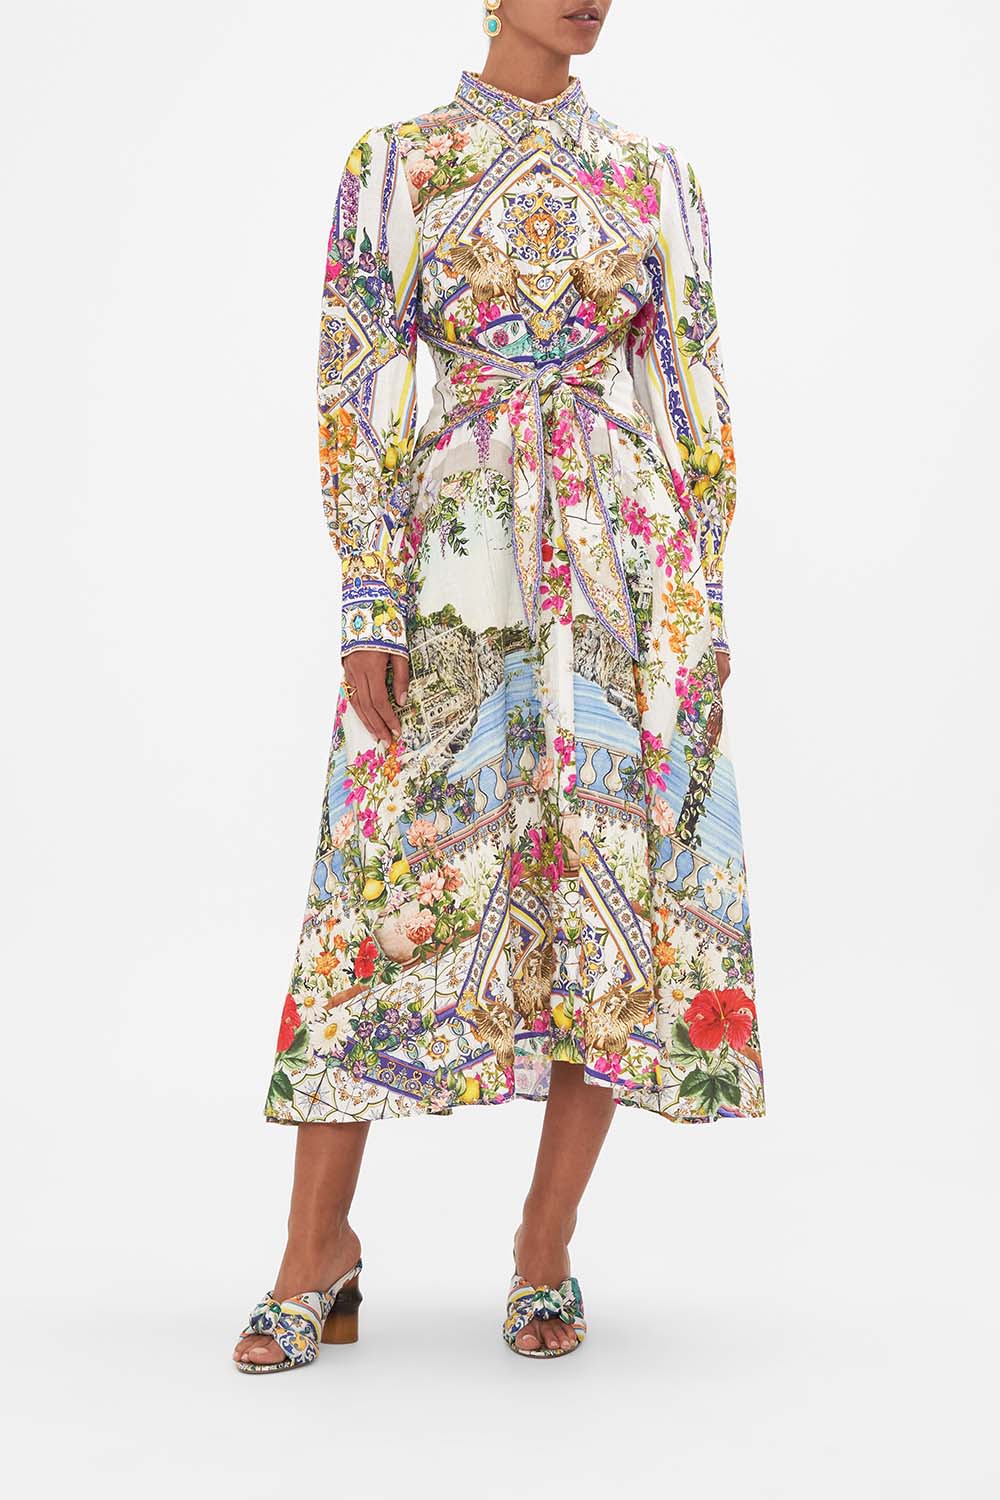 Front view of model wearing CAMILLA linen  shirt dress in Amalfi Amore print